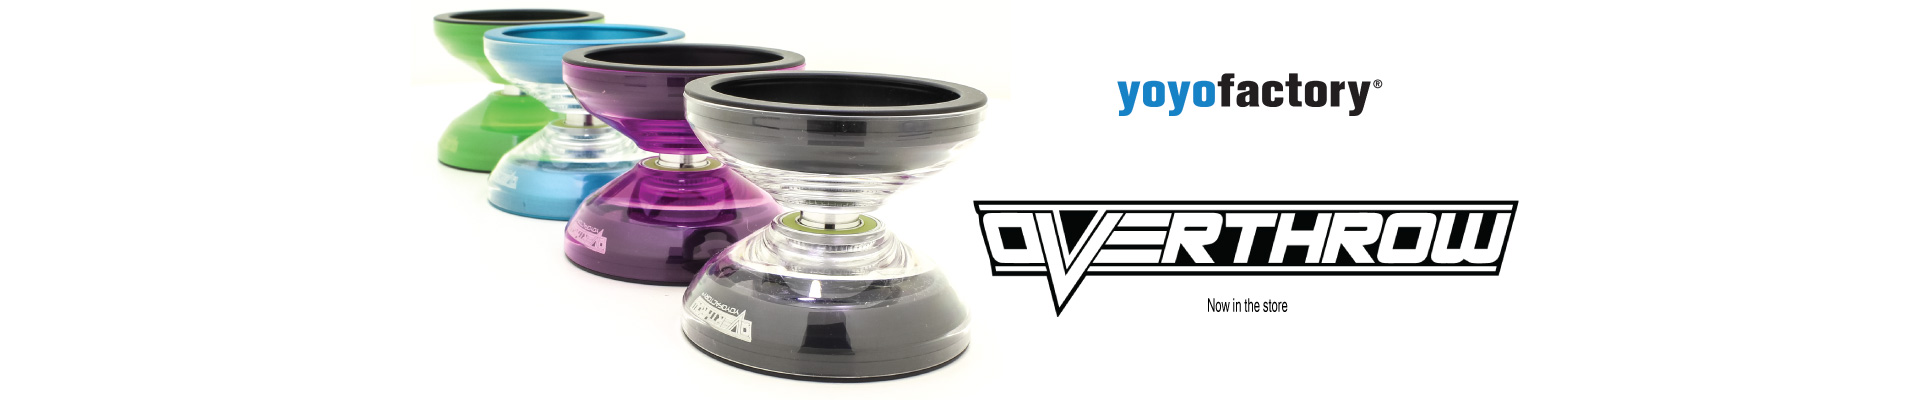 YoYoFactory Overthrow now in the store